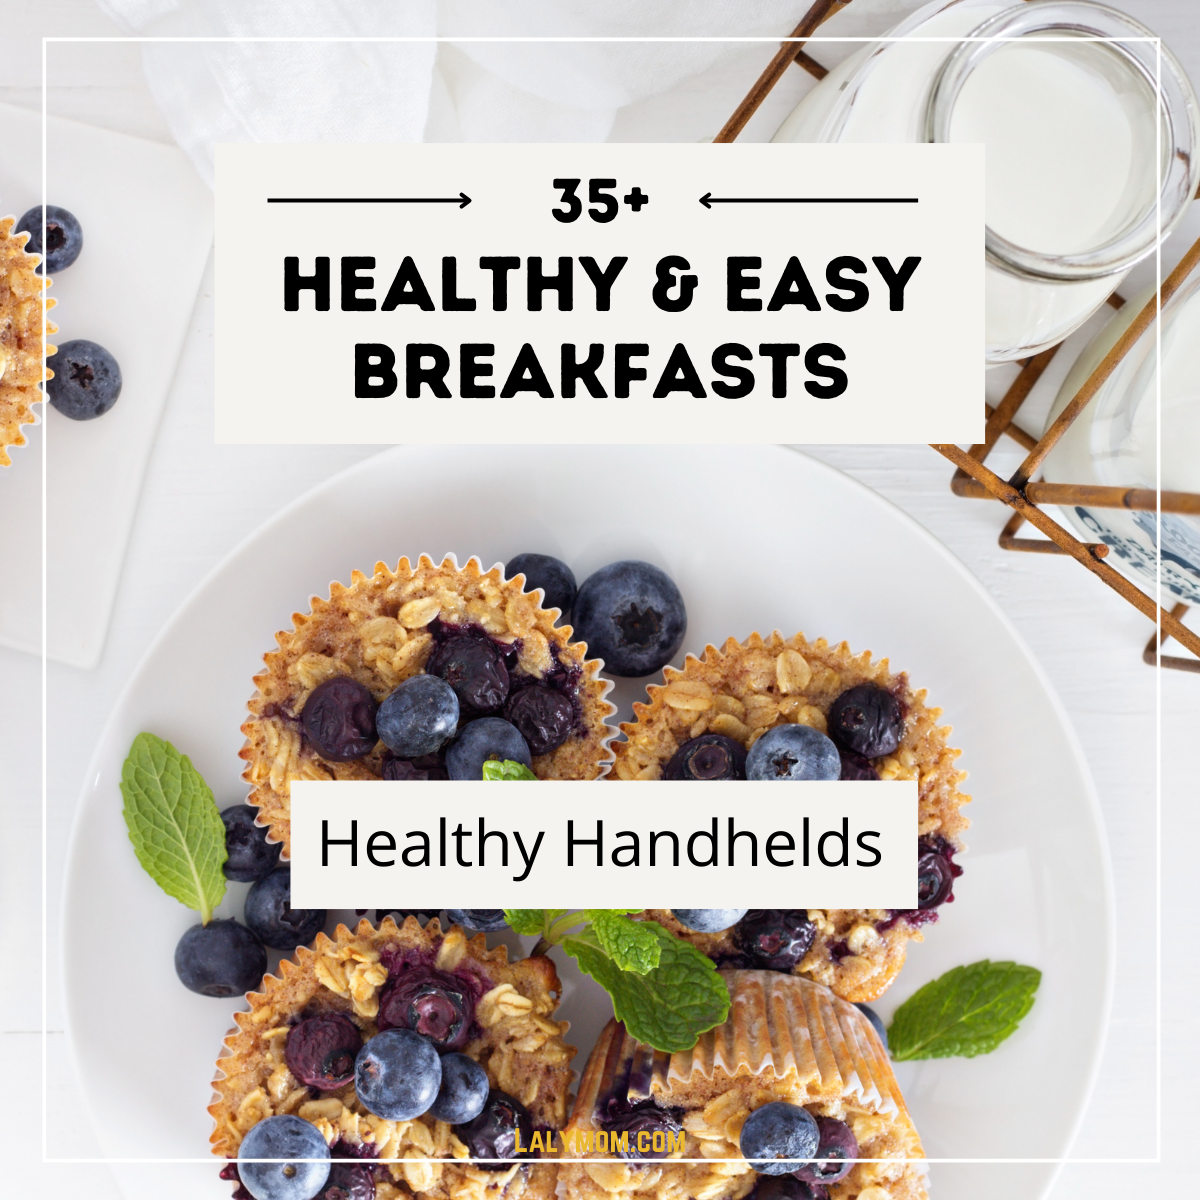 Photo of a plate of blueberry muffins with a glass of milk. Text reads 35+ Healthy & Easy Breakfasts - Healthy Handhelds.